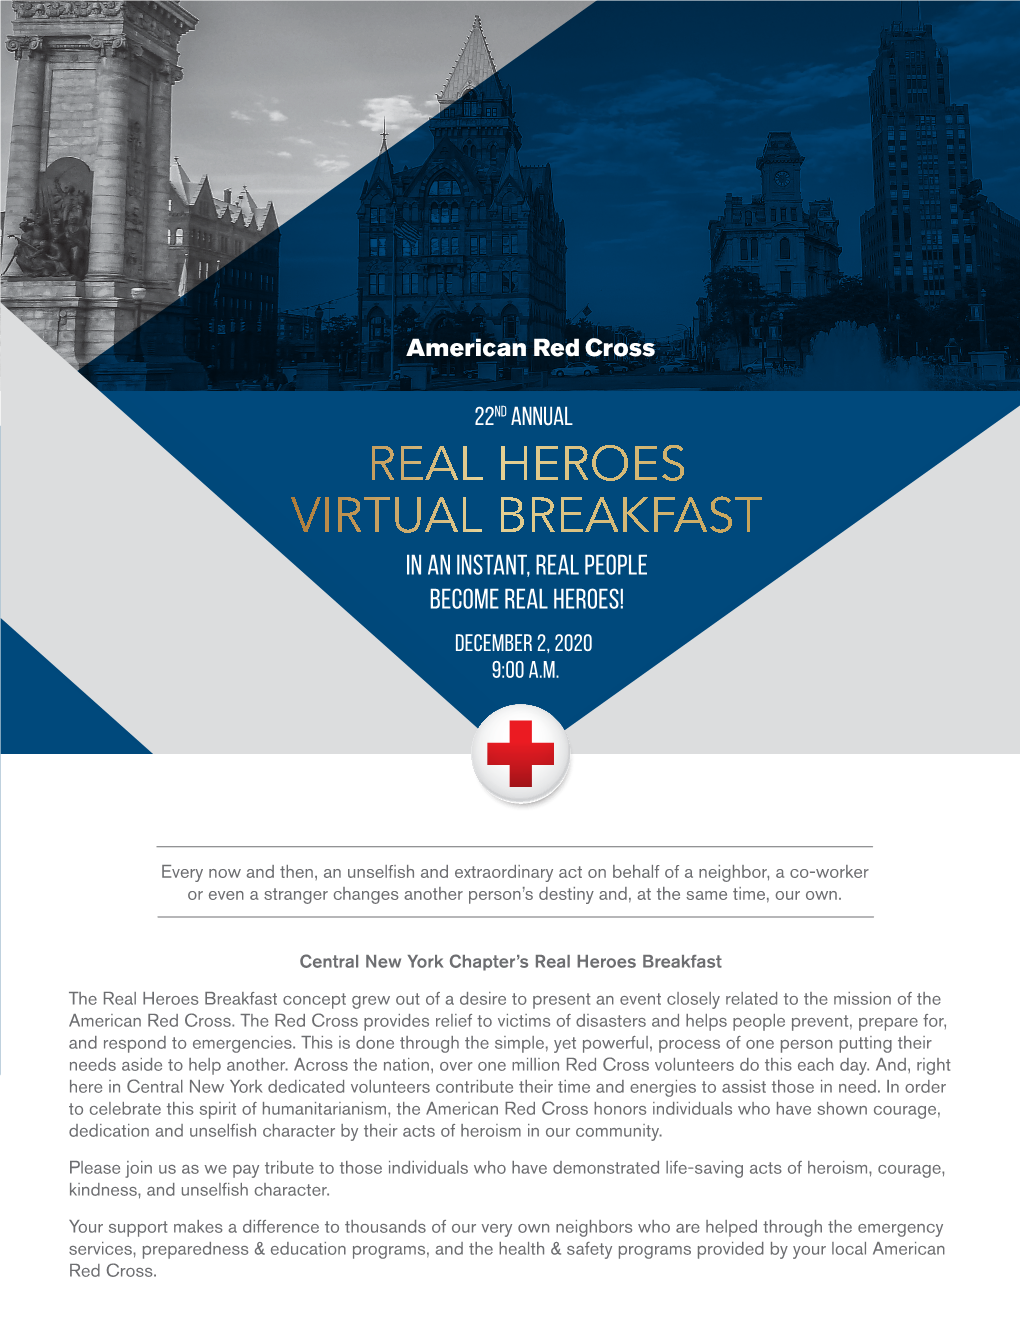 REAL HEROES VIRTUAL BREAKFAST in an Instant, Real People Become Real Heroes! DECEMBER 2, 2020 9:00 A.M